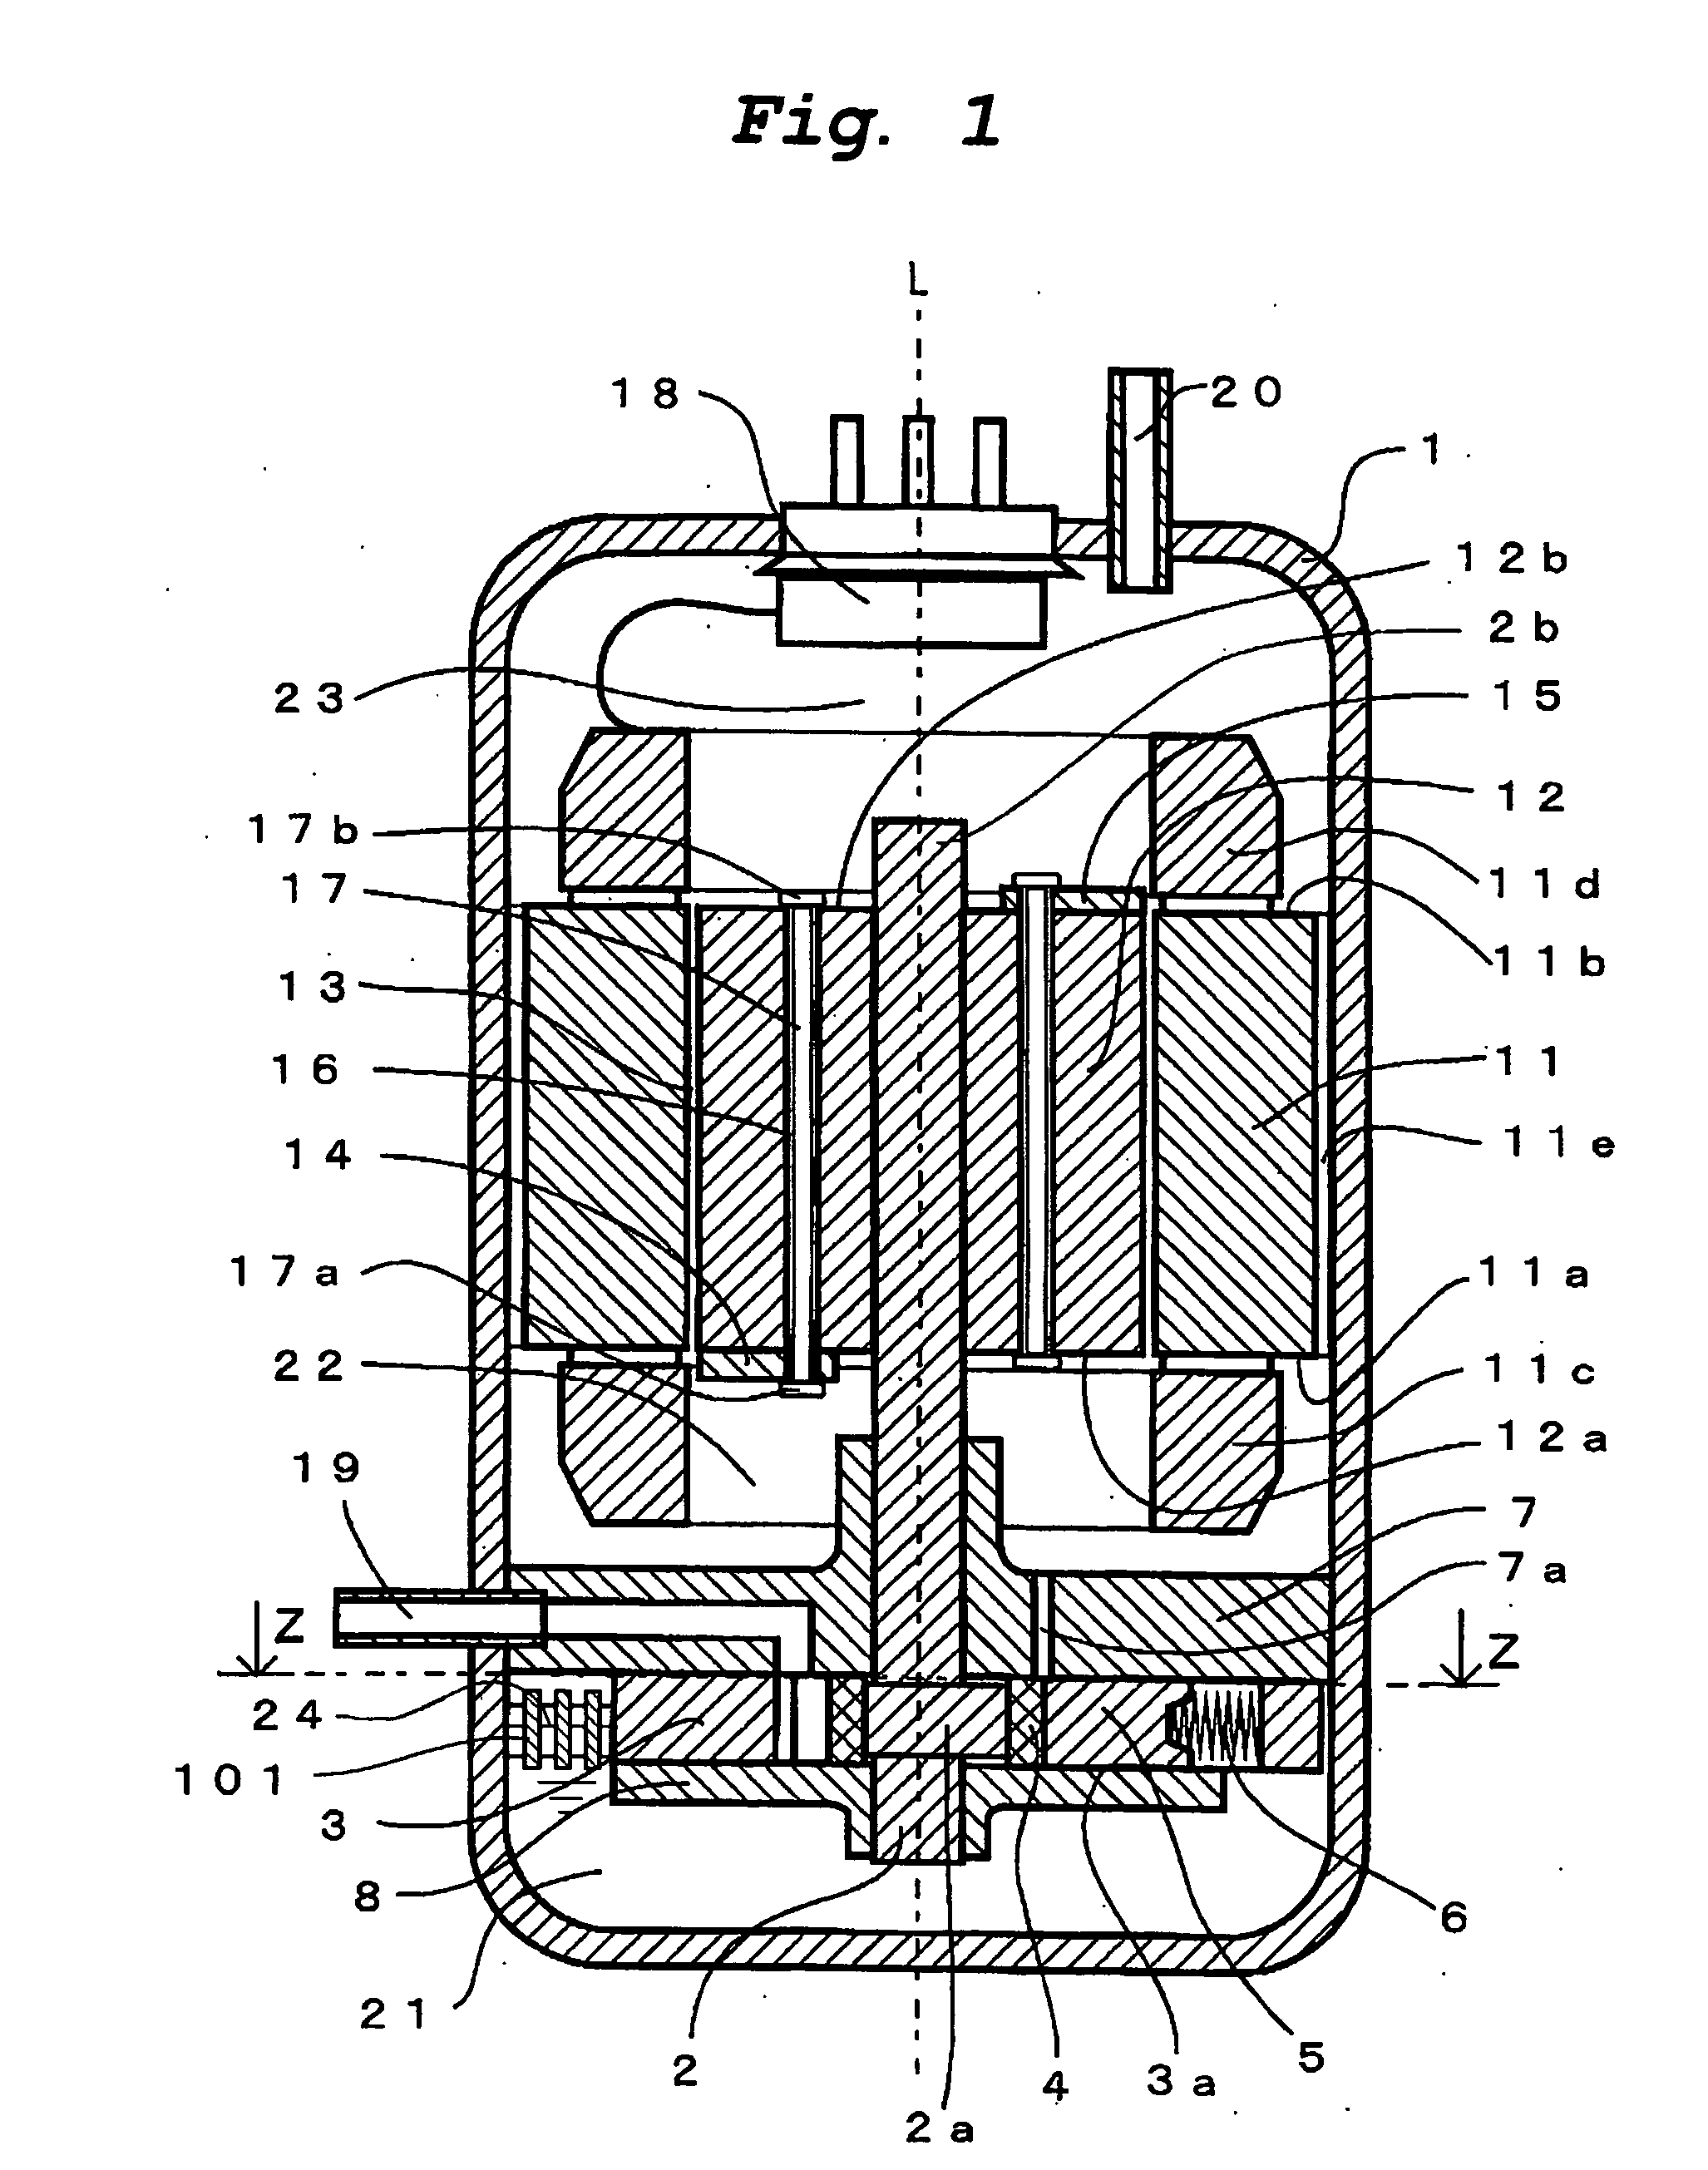 Hermetic type compressor with wave-suppressing member in the oil reservoir